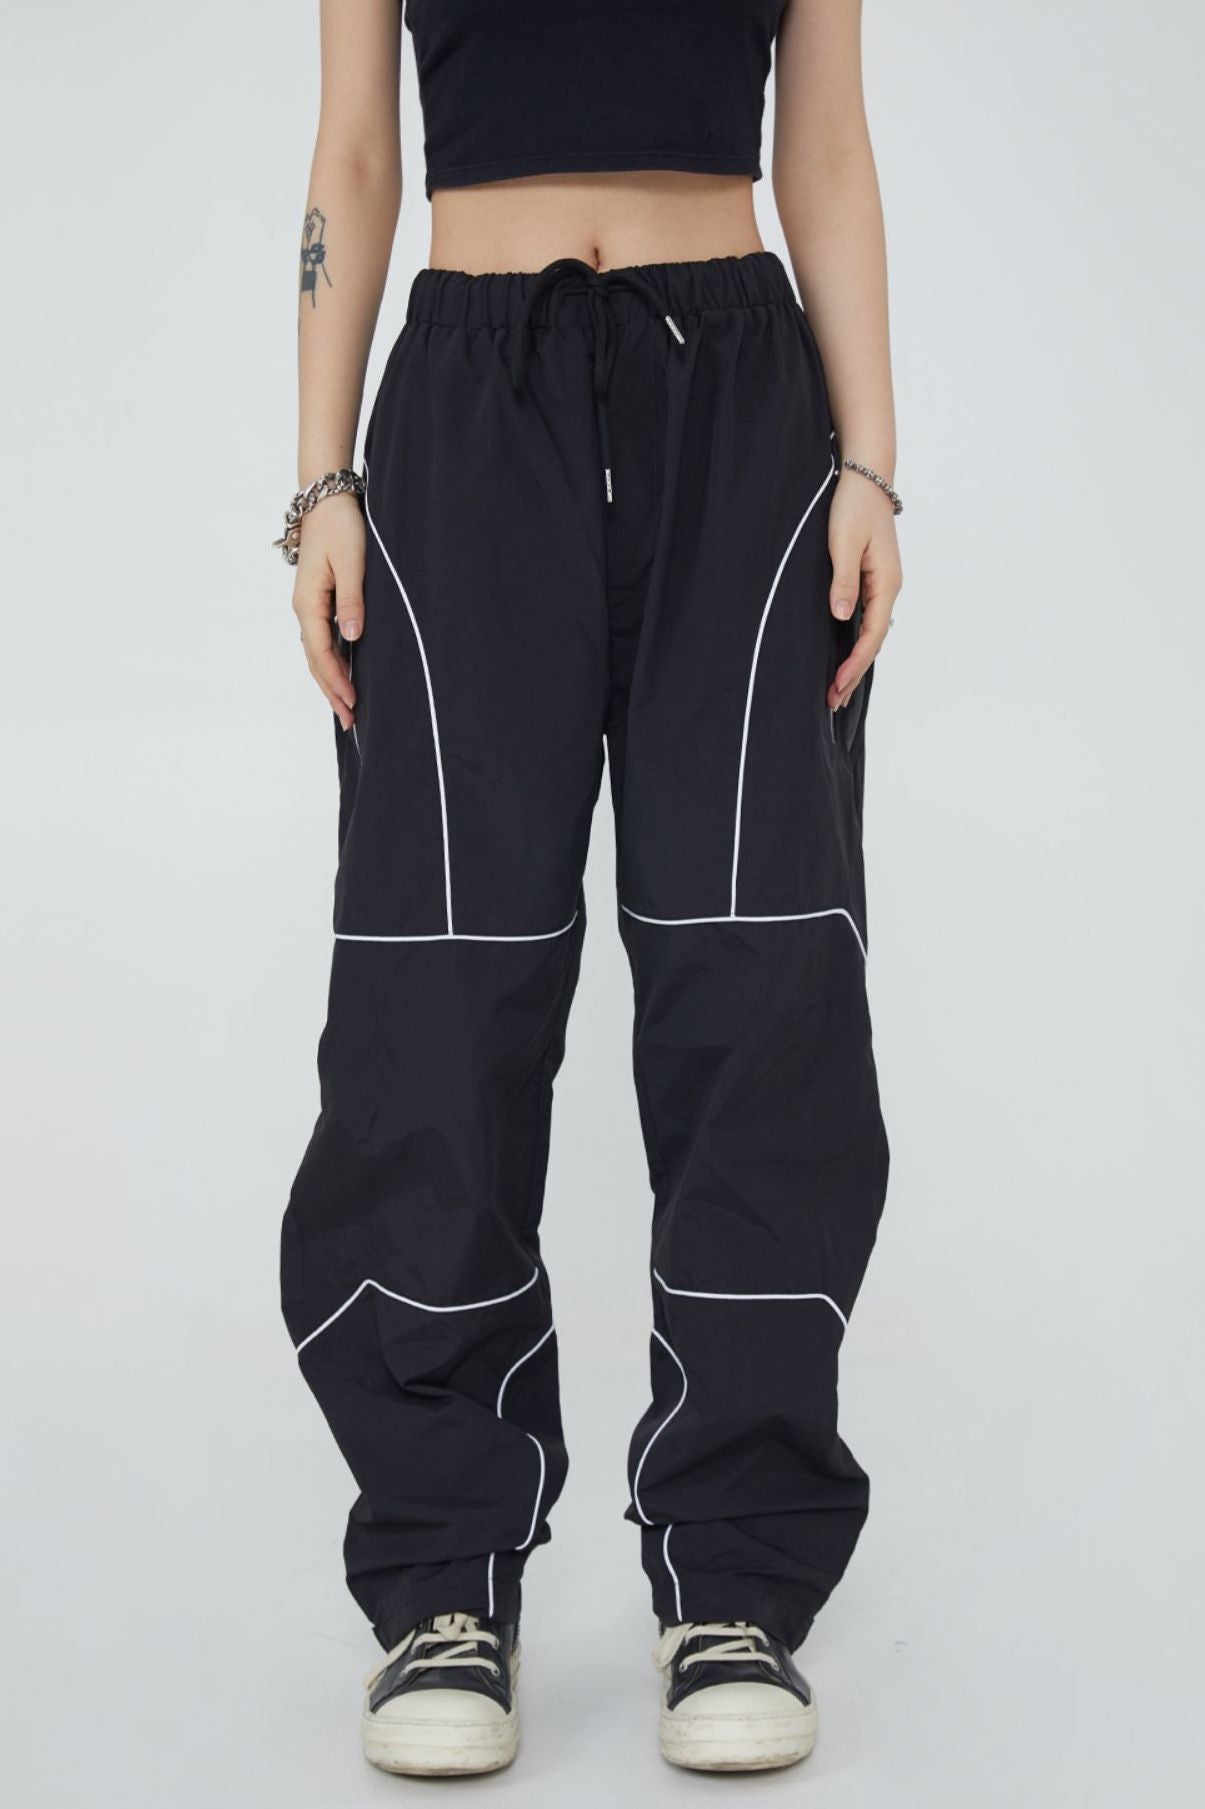 MADE EXTREME BLACK AIR Line Long Pants Black - YOUAREMYPOISON